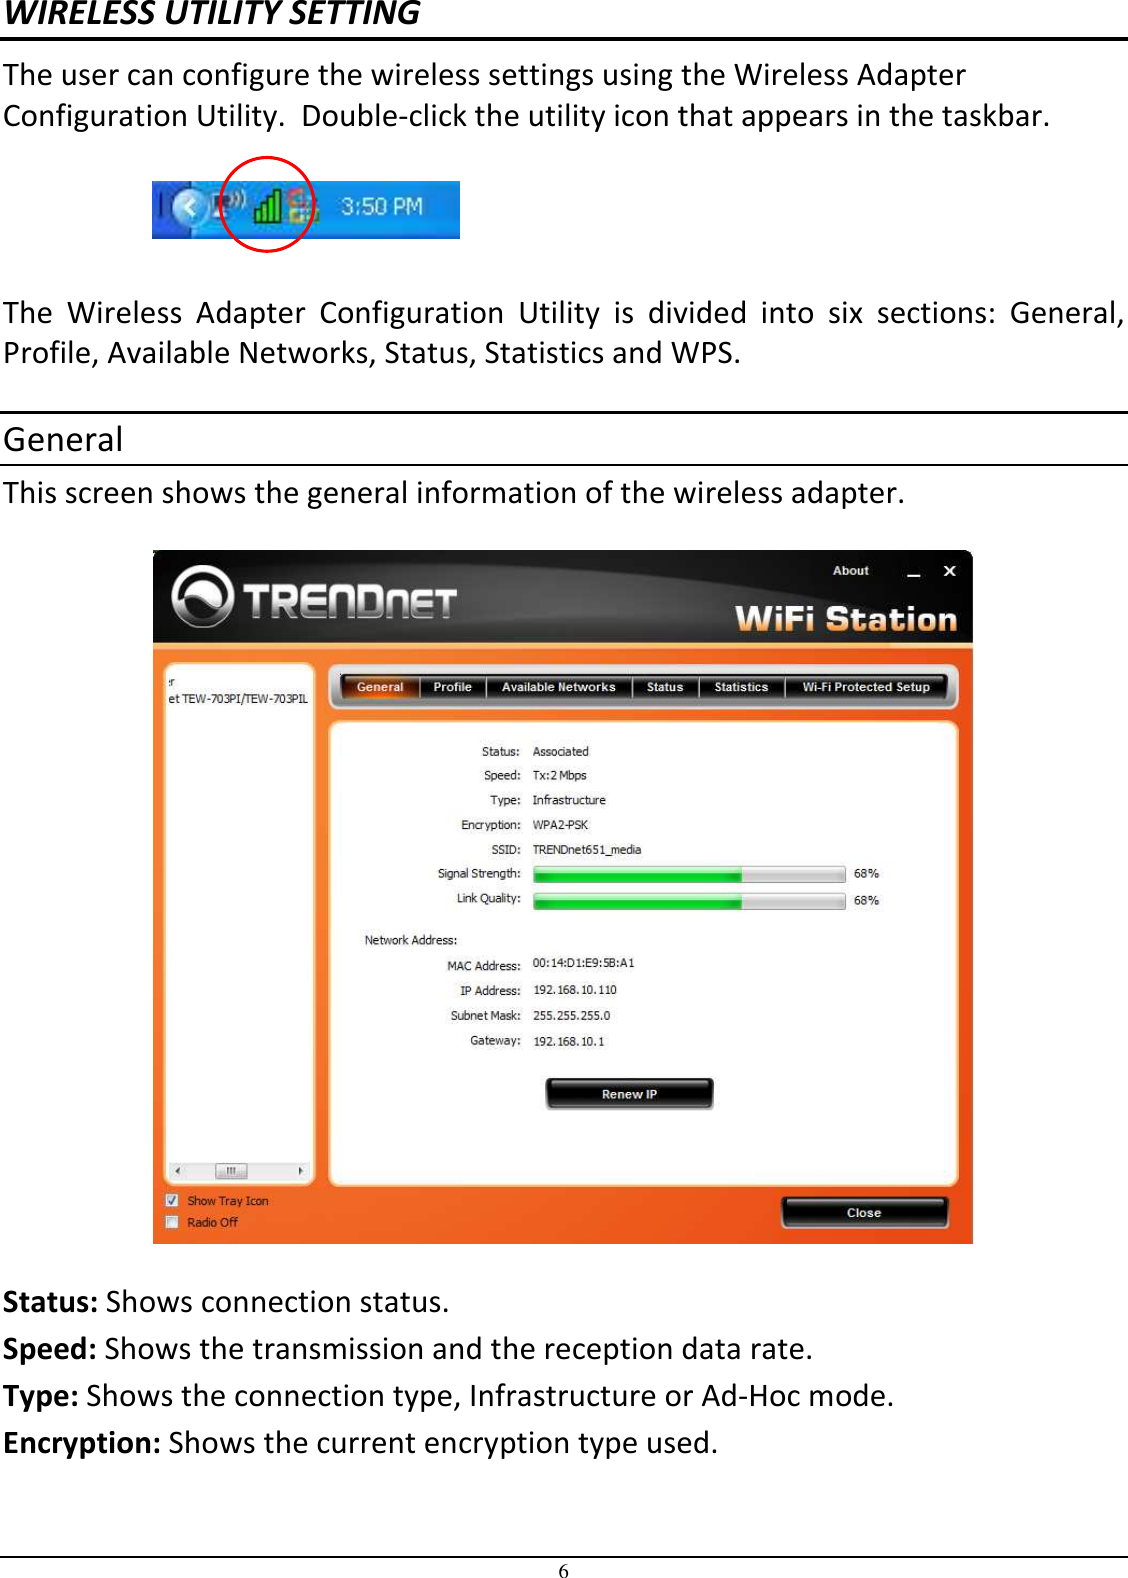 6 WIRELESS UTILITY SETTING The user can configure the wireless settings using the Wireless Adapter Configuration Utility.  Double-click the utility icon that appears in the taskbar.    The  Wireless  Adapter  Configuration  Utility  is  divided  into  six  sections:  General, Profile, Available Networks, Status, Statistics and WPS.  General This screen shows the general information of the wireless adapter.     Status: Shows connection status. Speed: Shows the transmission and the reception data rate.   Type: Shows the connection type, Infrastructure or Ad-Hoc mode.  Encryption: Shows the current encryption type used.  